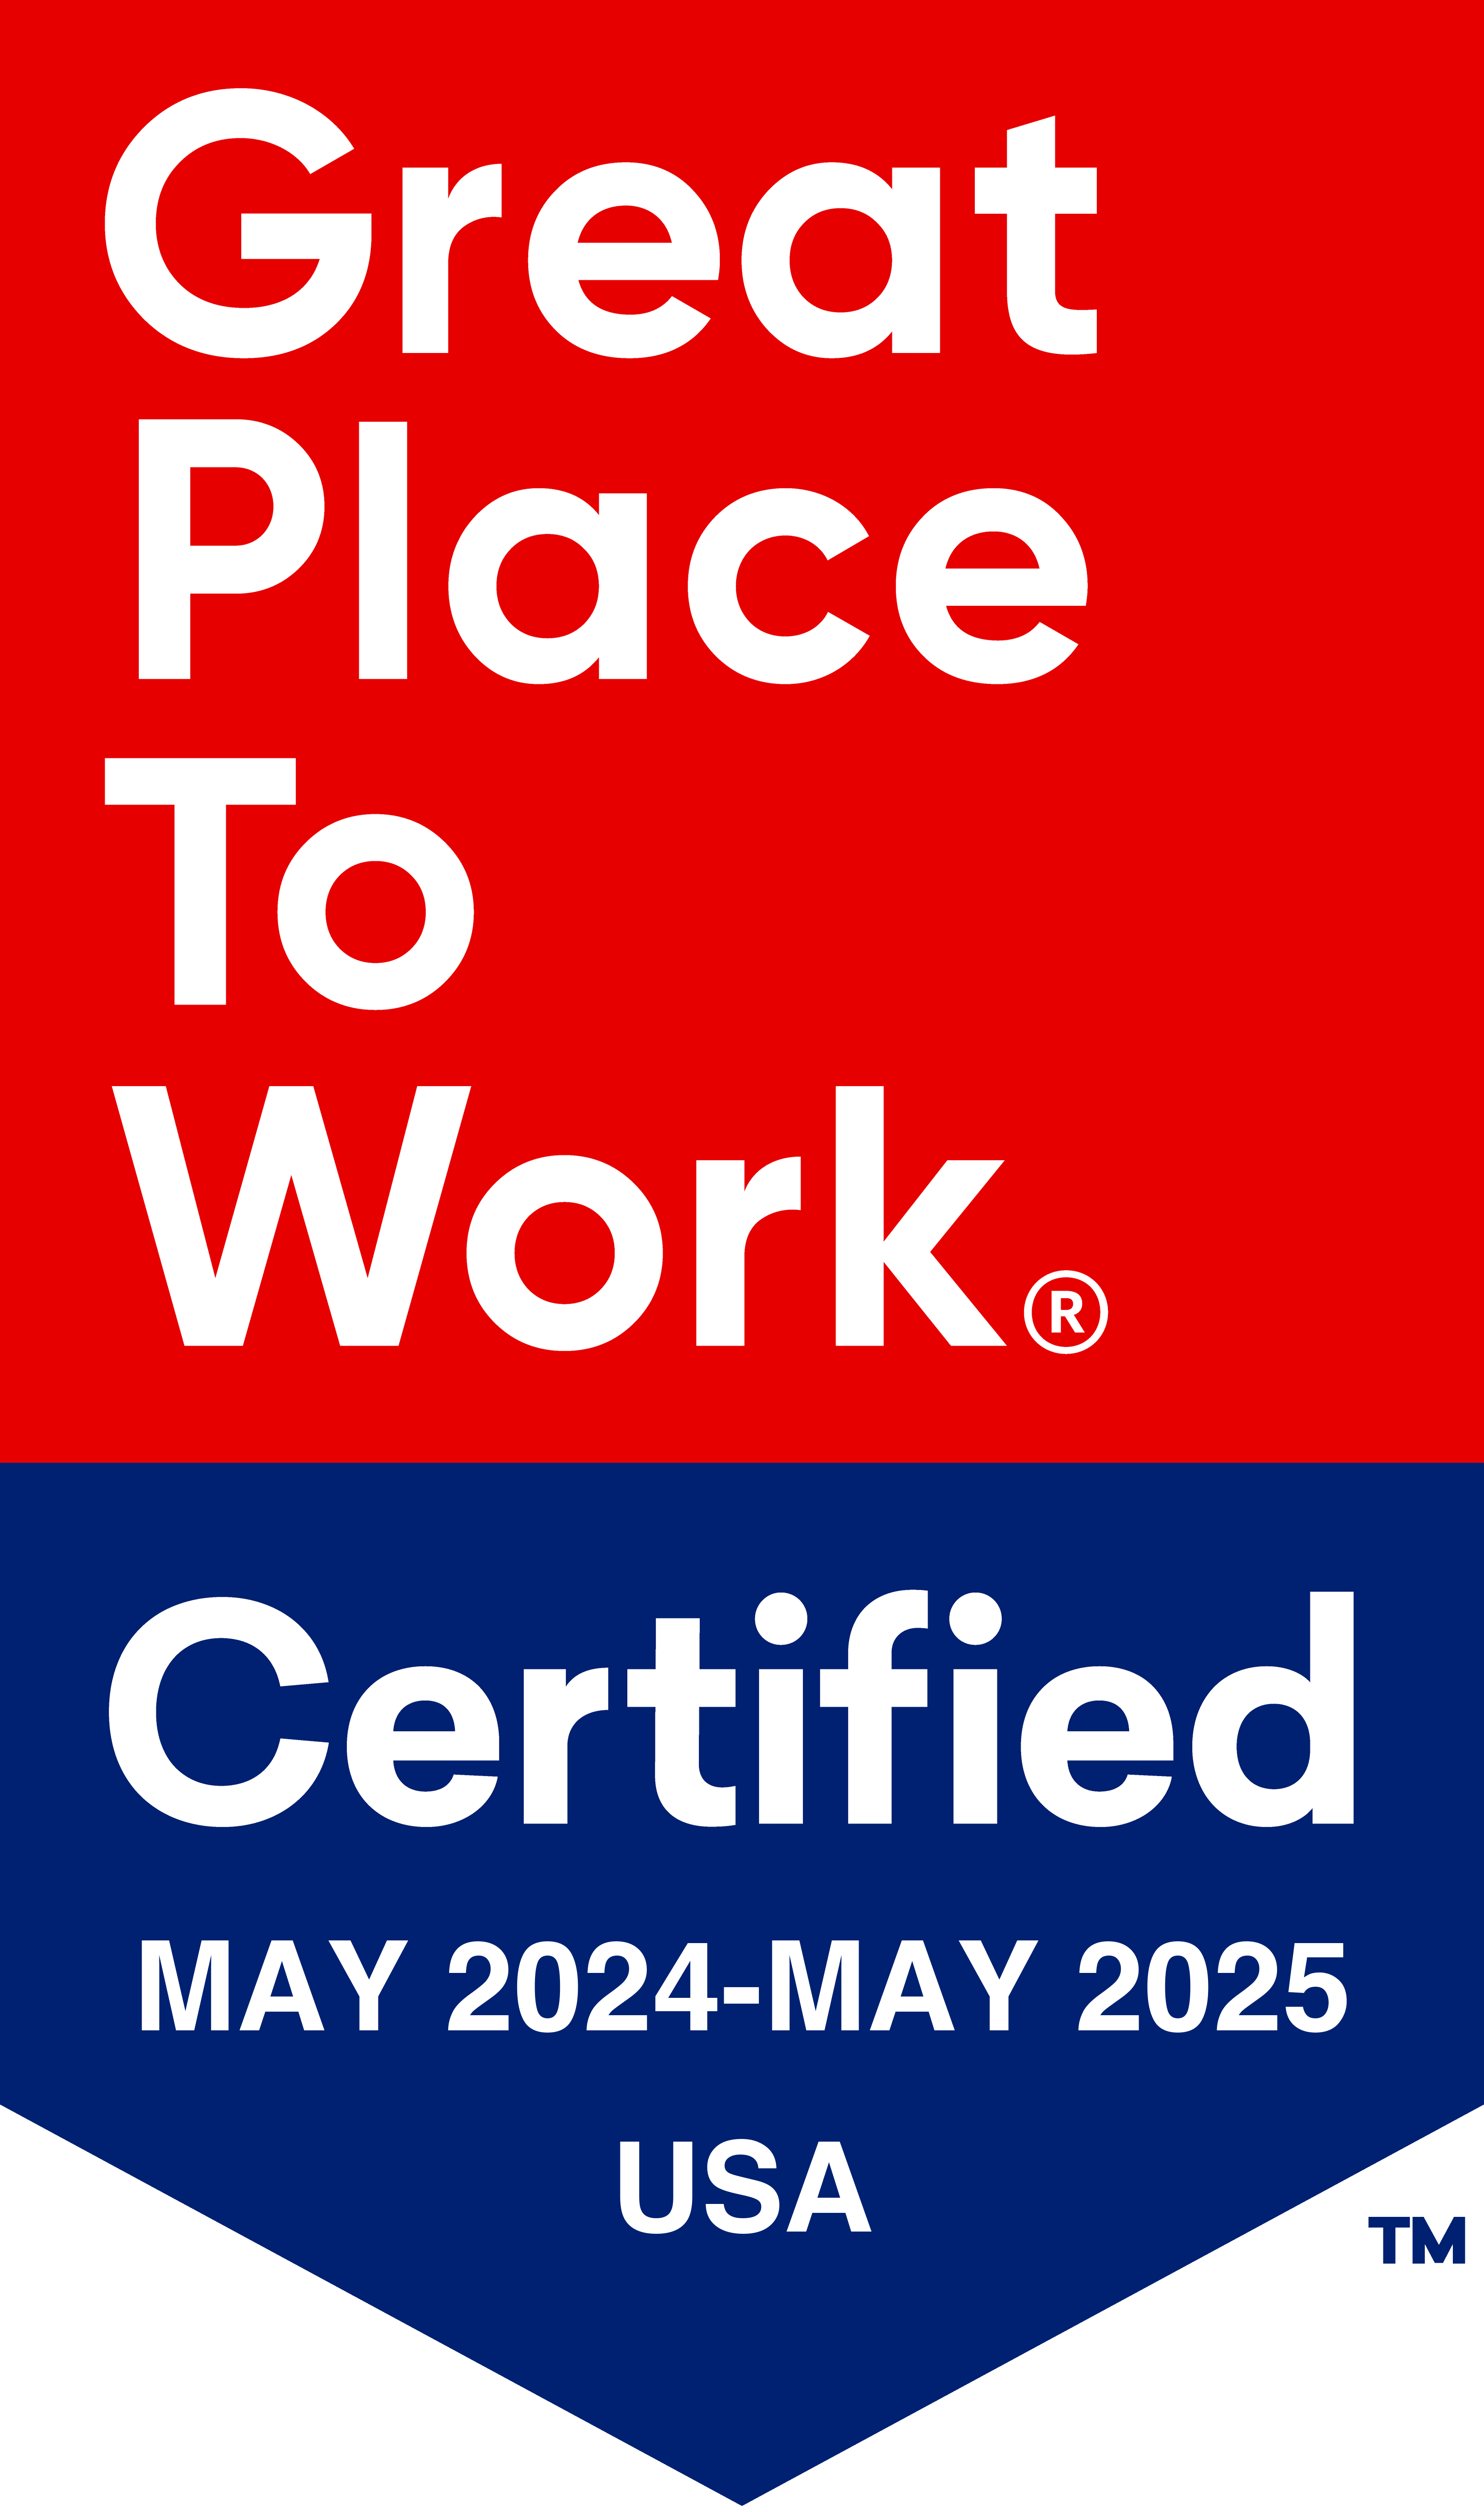 Great place to work logo for Clearwater at Sonoma Hills in Rohnert Park, California